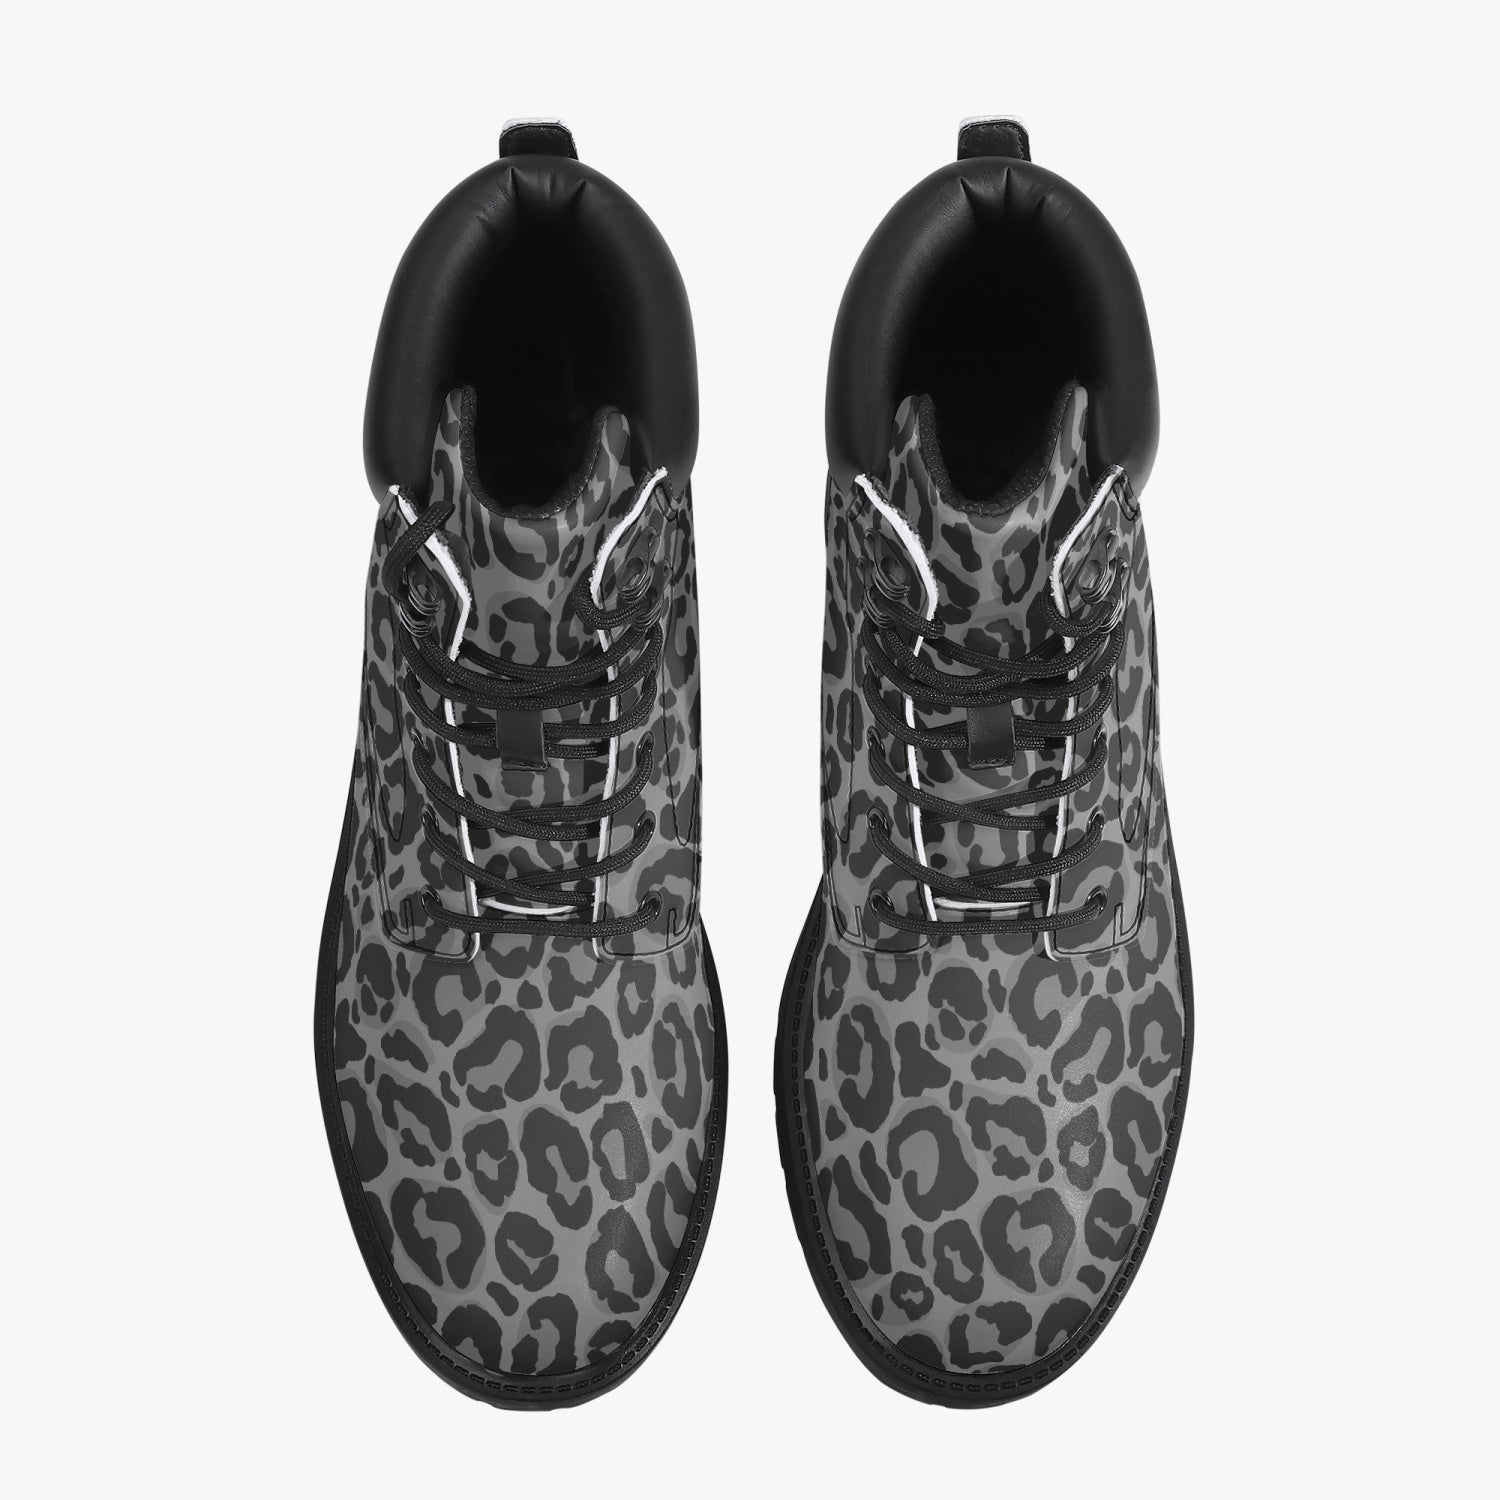 Grey Leopard Leather Boots, Animal Print Lace Up Shoes Waterproof Hiking Festival Black Ankle Combat Work Winter Casual Custom Gift Starcove Fashion